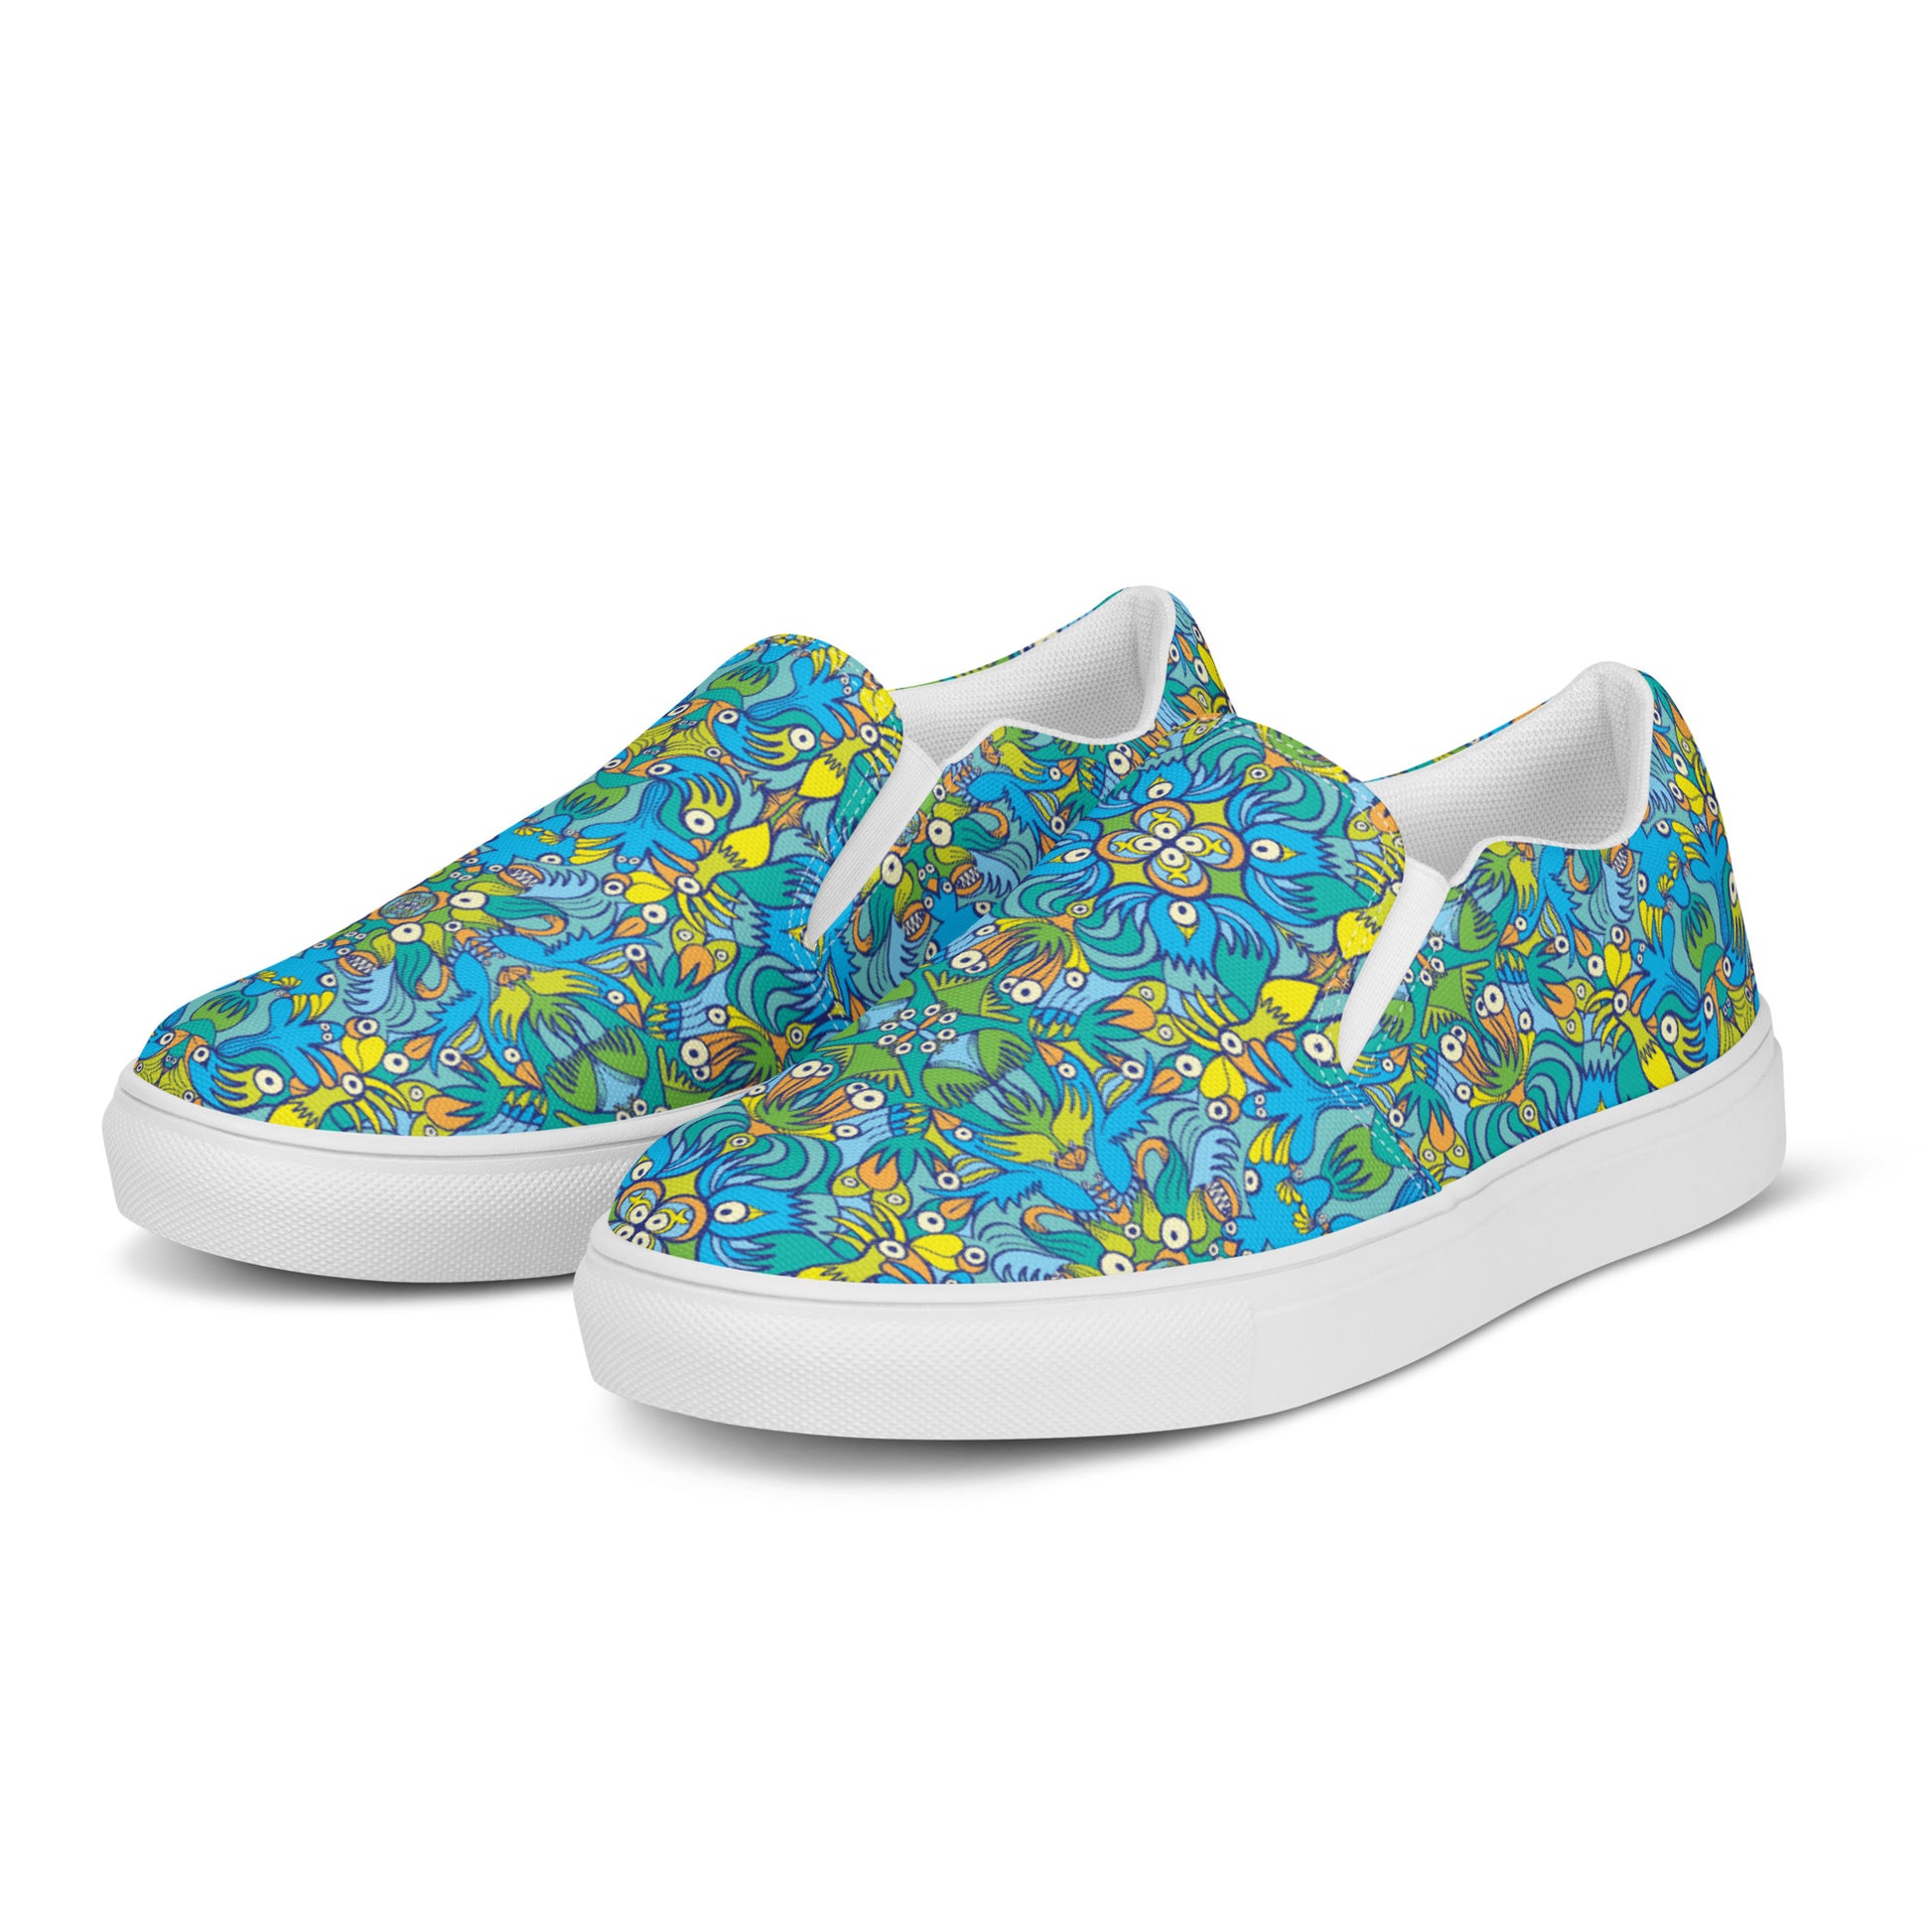 Exotic birds tropical pattern Men’s slip-on canvas shoes. Overview